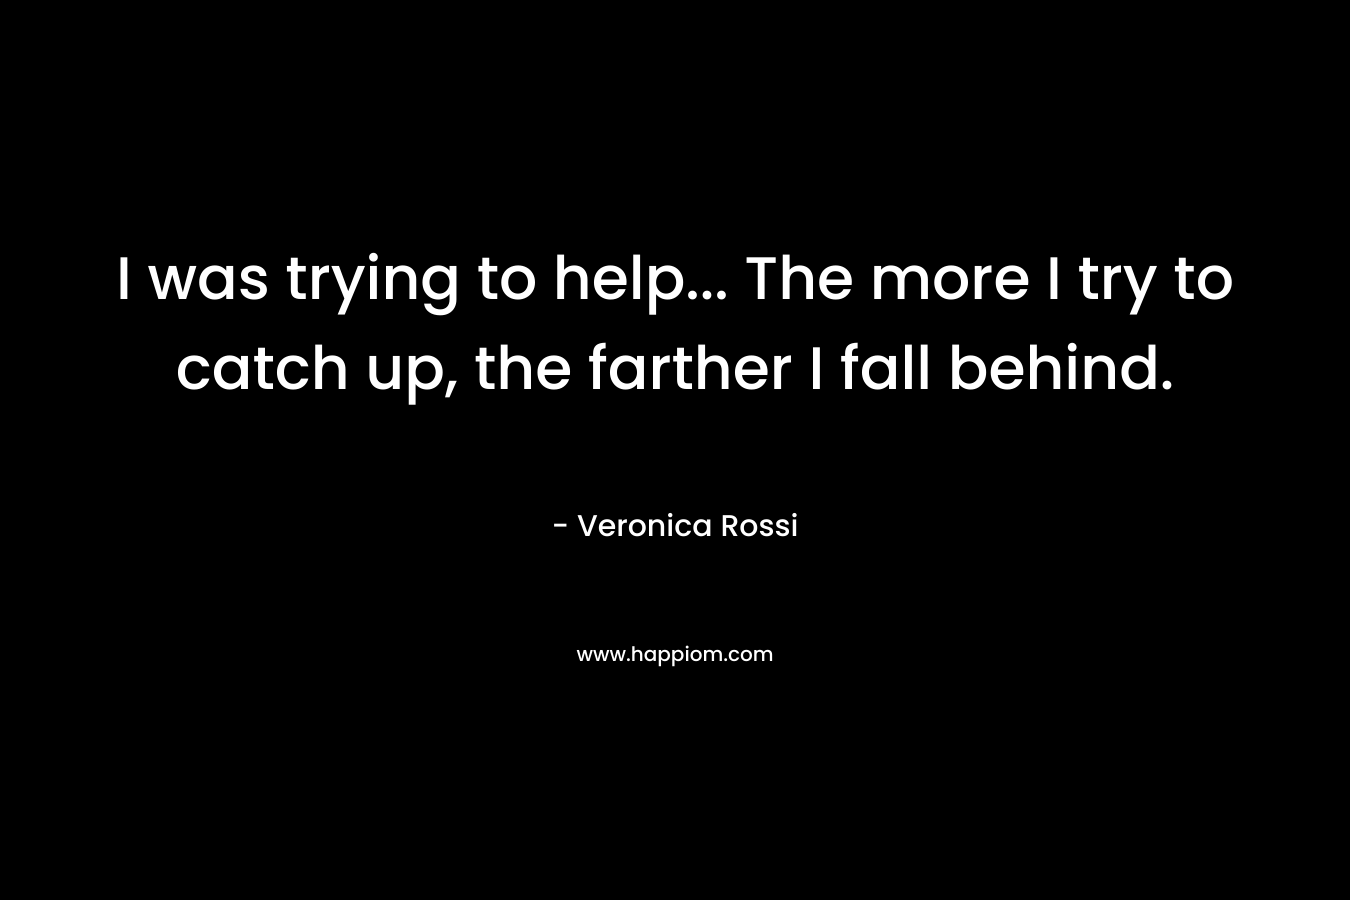 I was trying to help… The more I try to catch up, the farther I fall behind. – Veronica Rossi